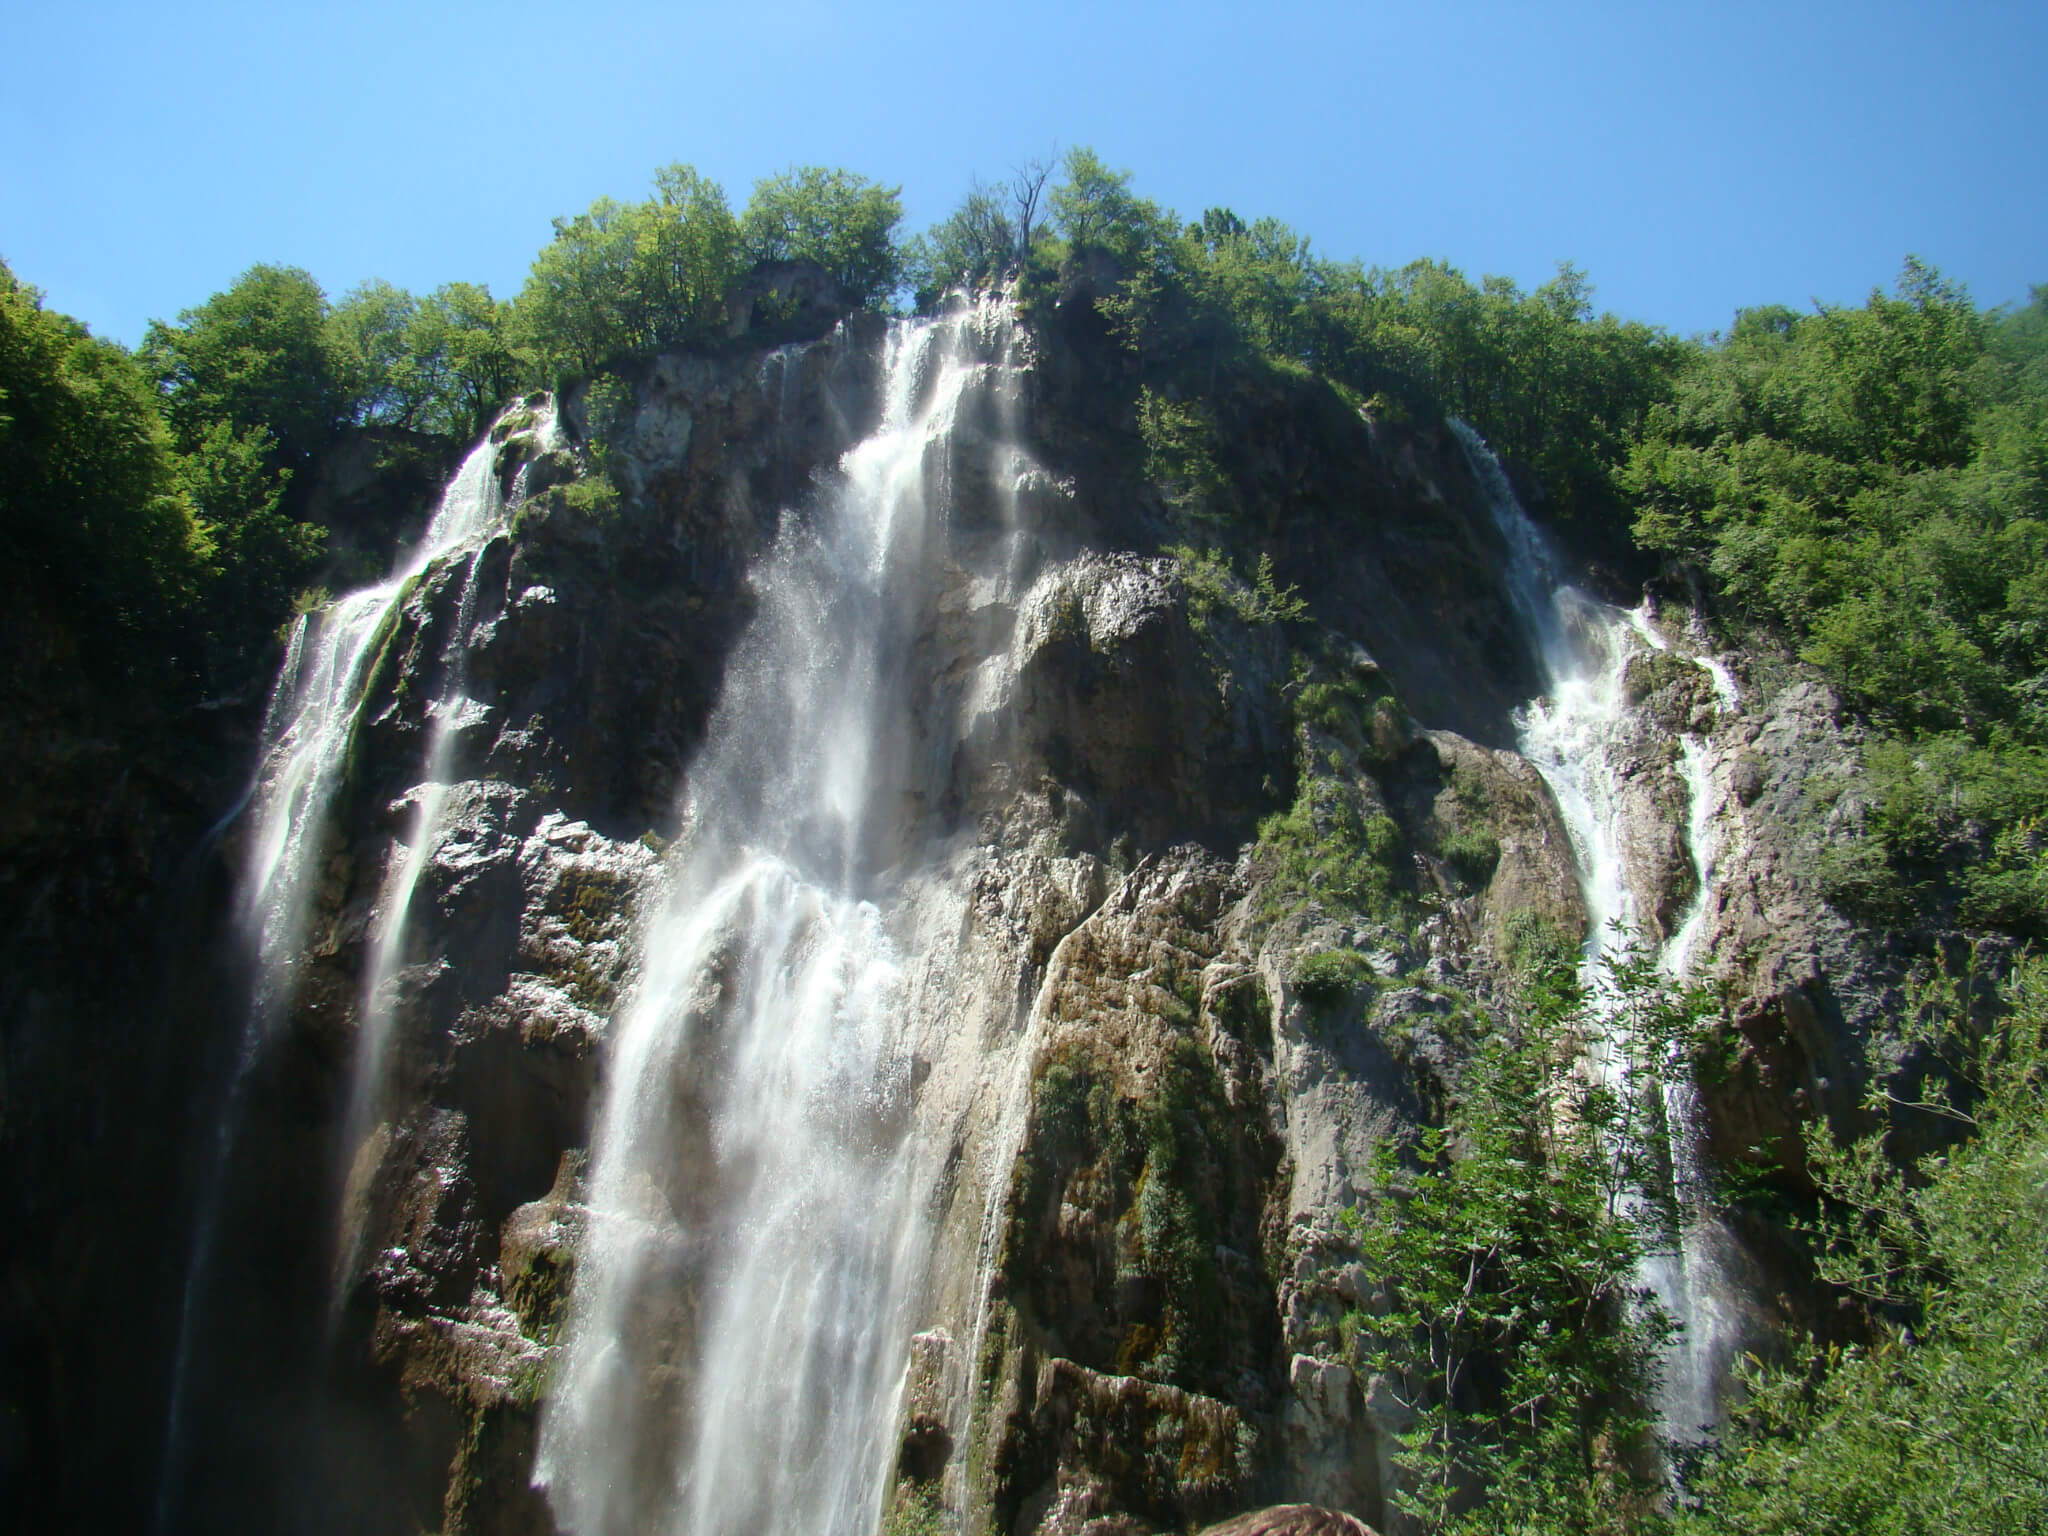 Waterfalls in the park